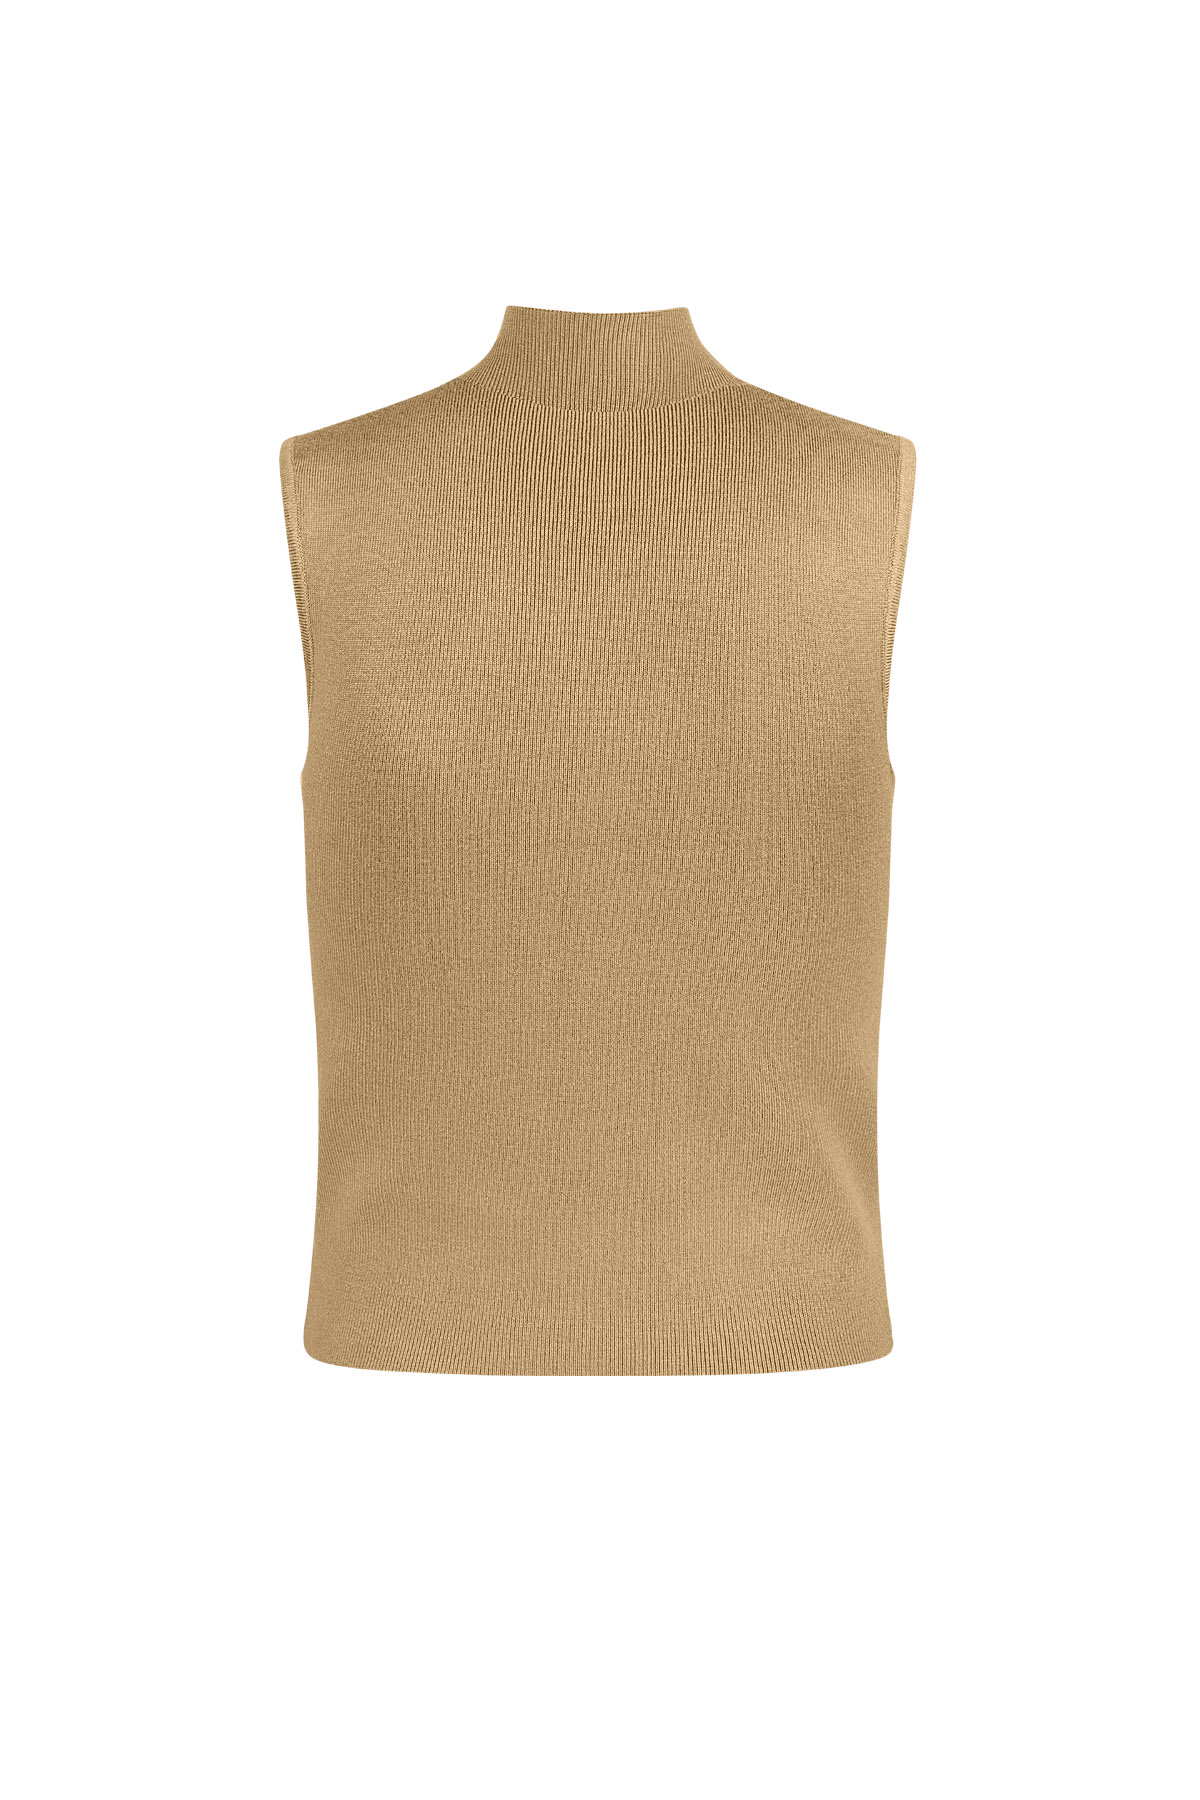 Sleeveless top with low turtleneck large/extra large – brown h5 Picture7